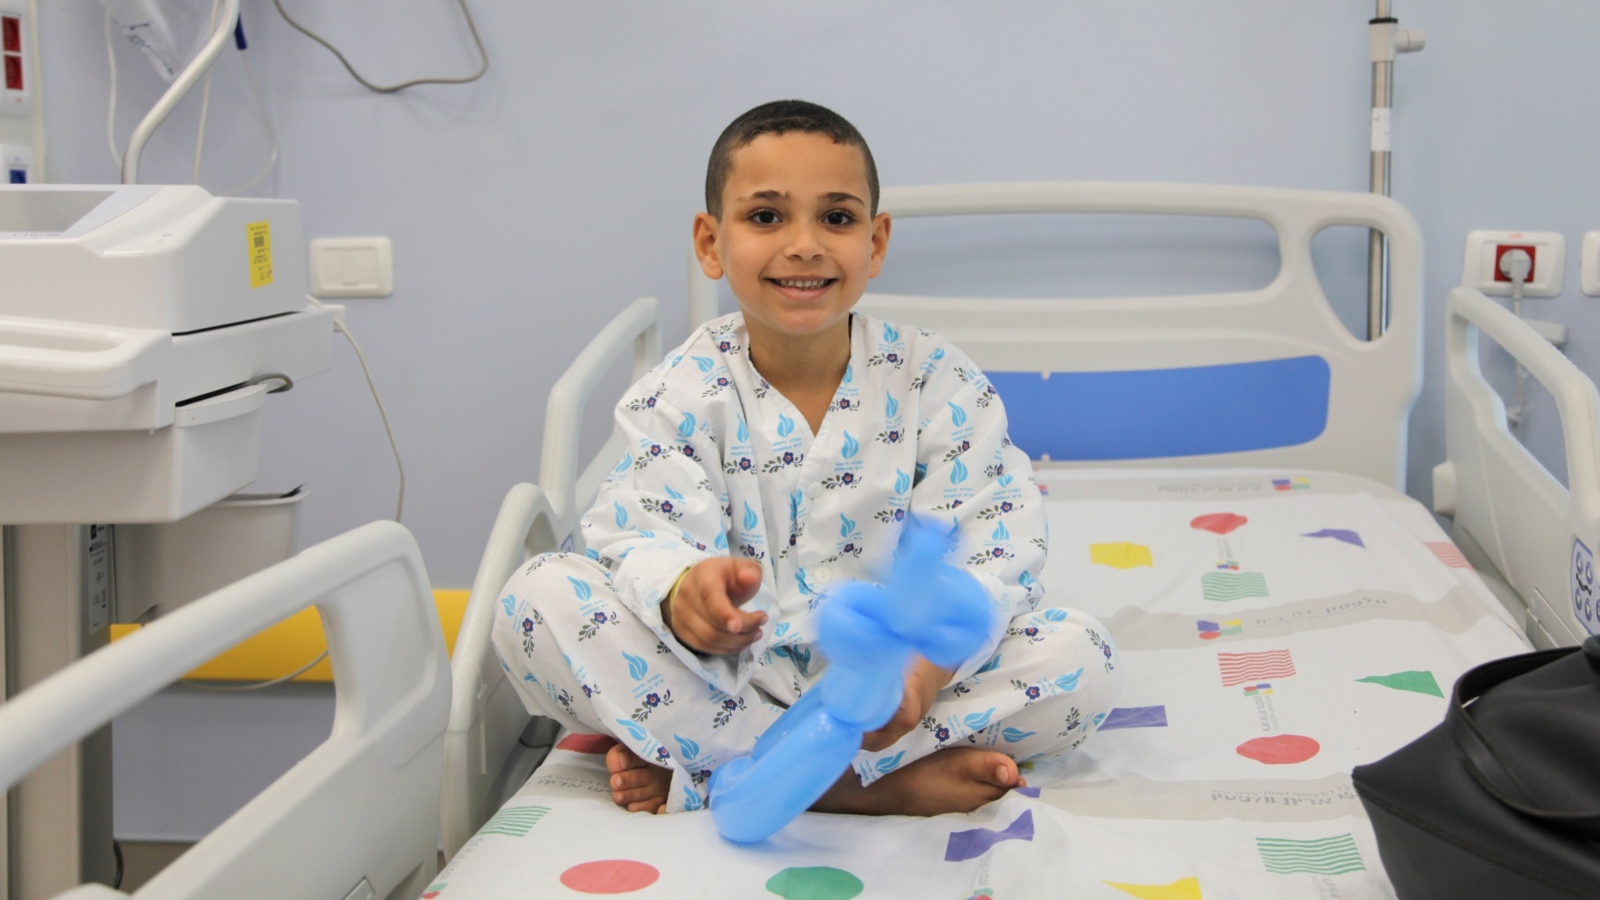 Amir Yichya Mabchuch, 5, was the 3,000th patient from Gaza and the Palestinian Authority territories to be treated at Save a Childâ€™s Heart in Holon, Israel. Photo courtesy of SACH